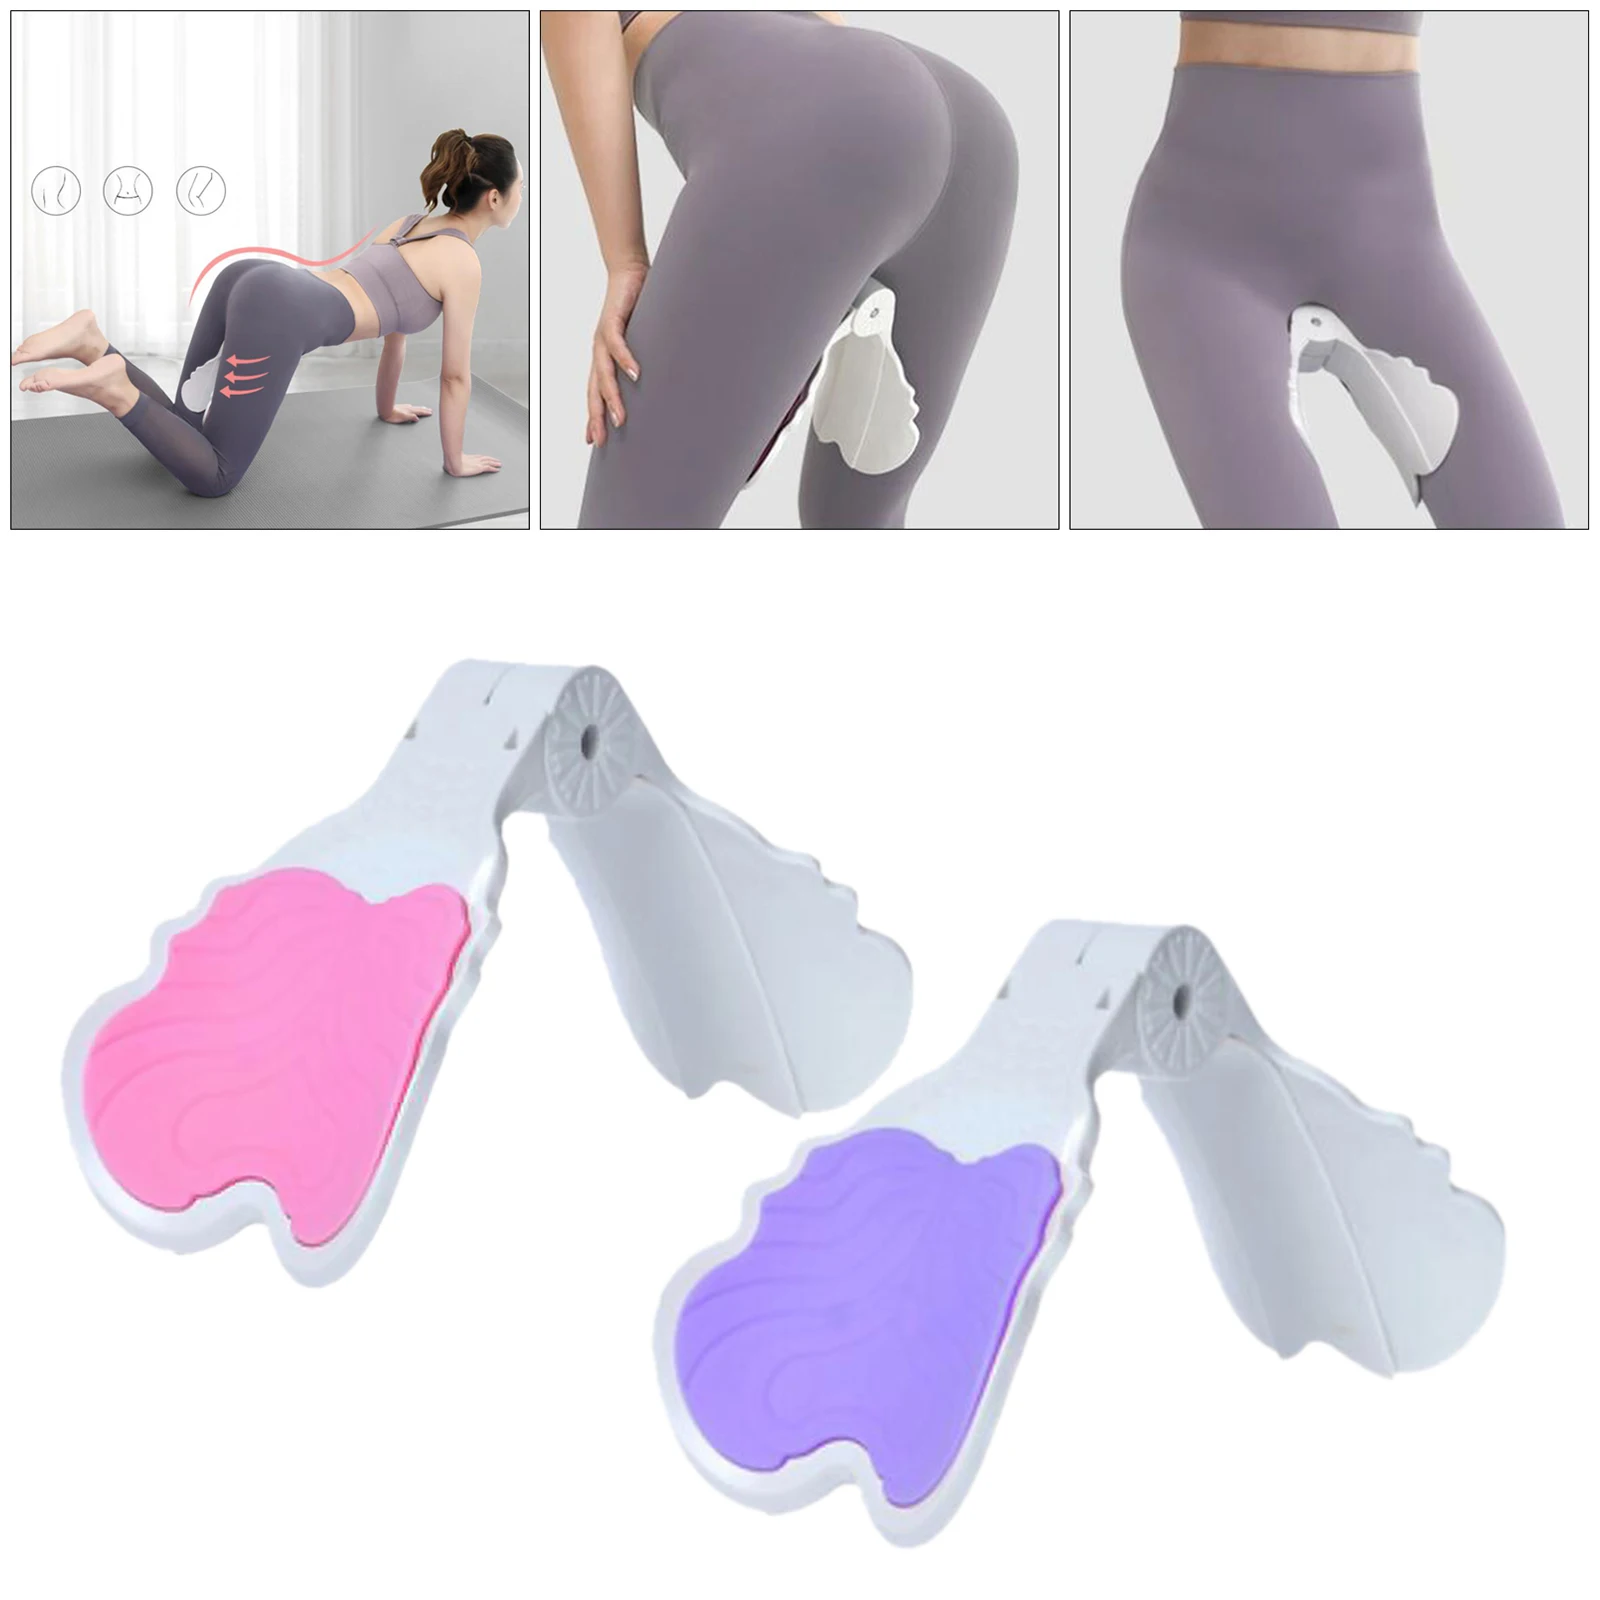 Thigh Master for Inner Thighs Thigh Workout Equipment for Home Gym Yoga Sport Weight Loss Fitness Tool